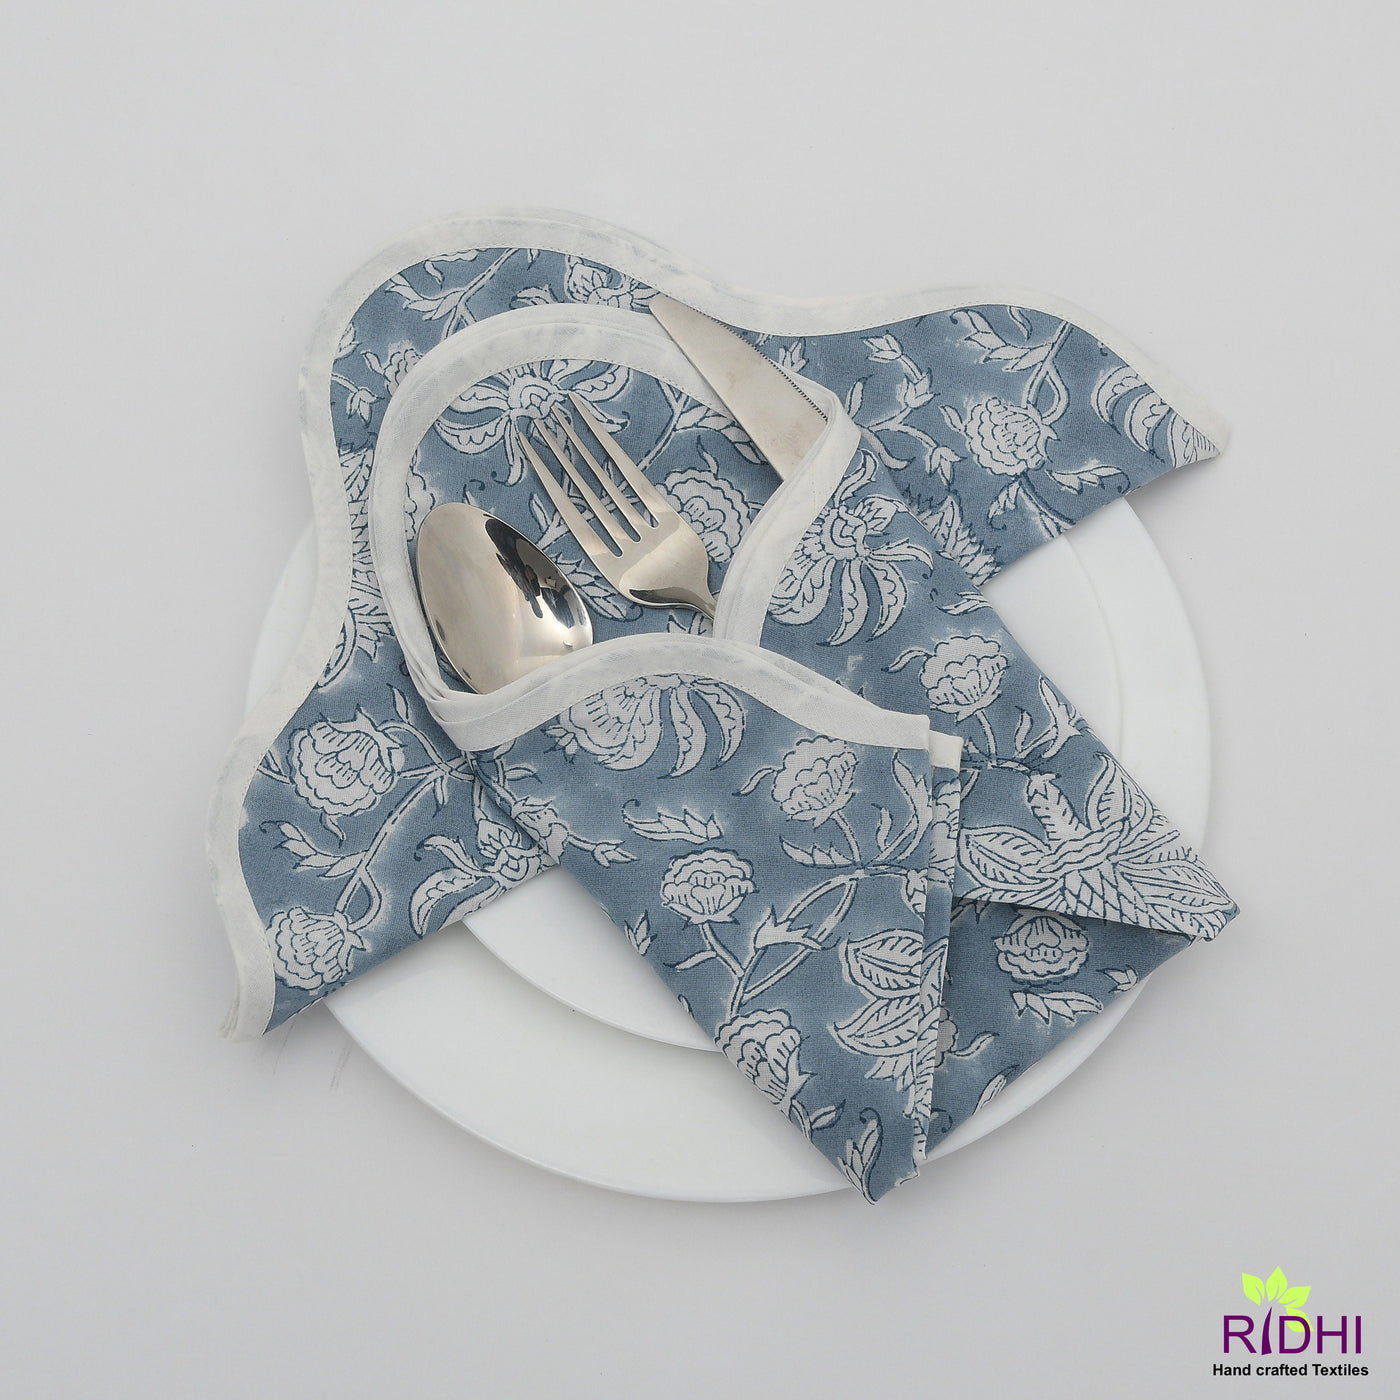 Fabricrush Airforce Blue and White Indian Hand Block Floral Piping Cotton Cloth Napkins, Wedding Home Event Party Garden Outdoor Fall Kitchen Farmhouse